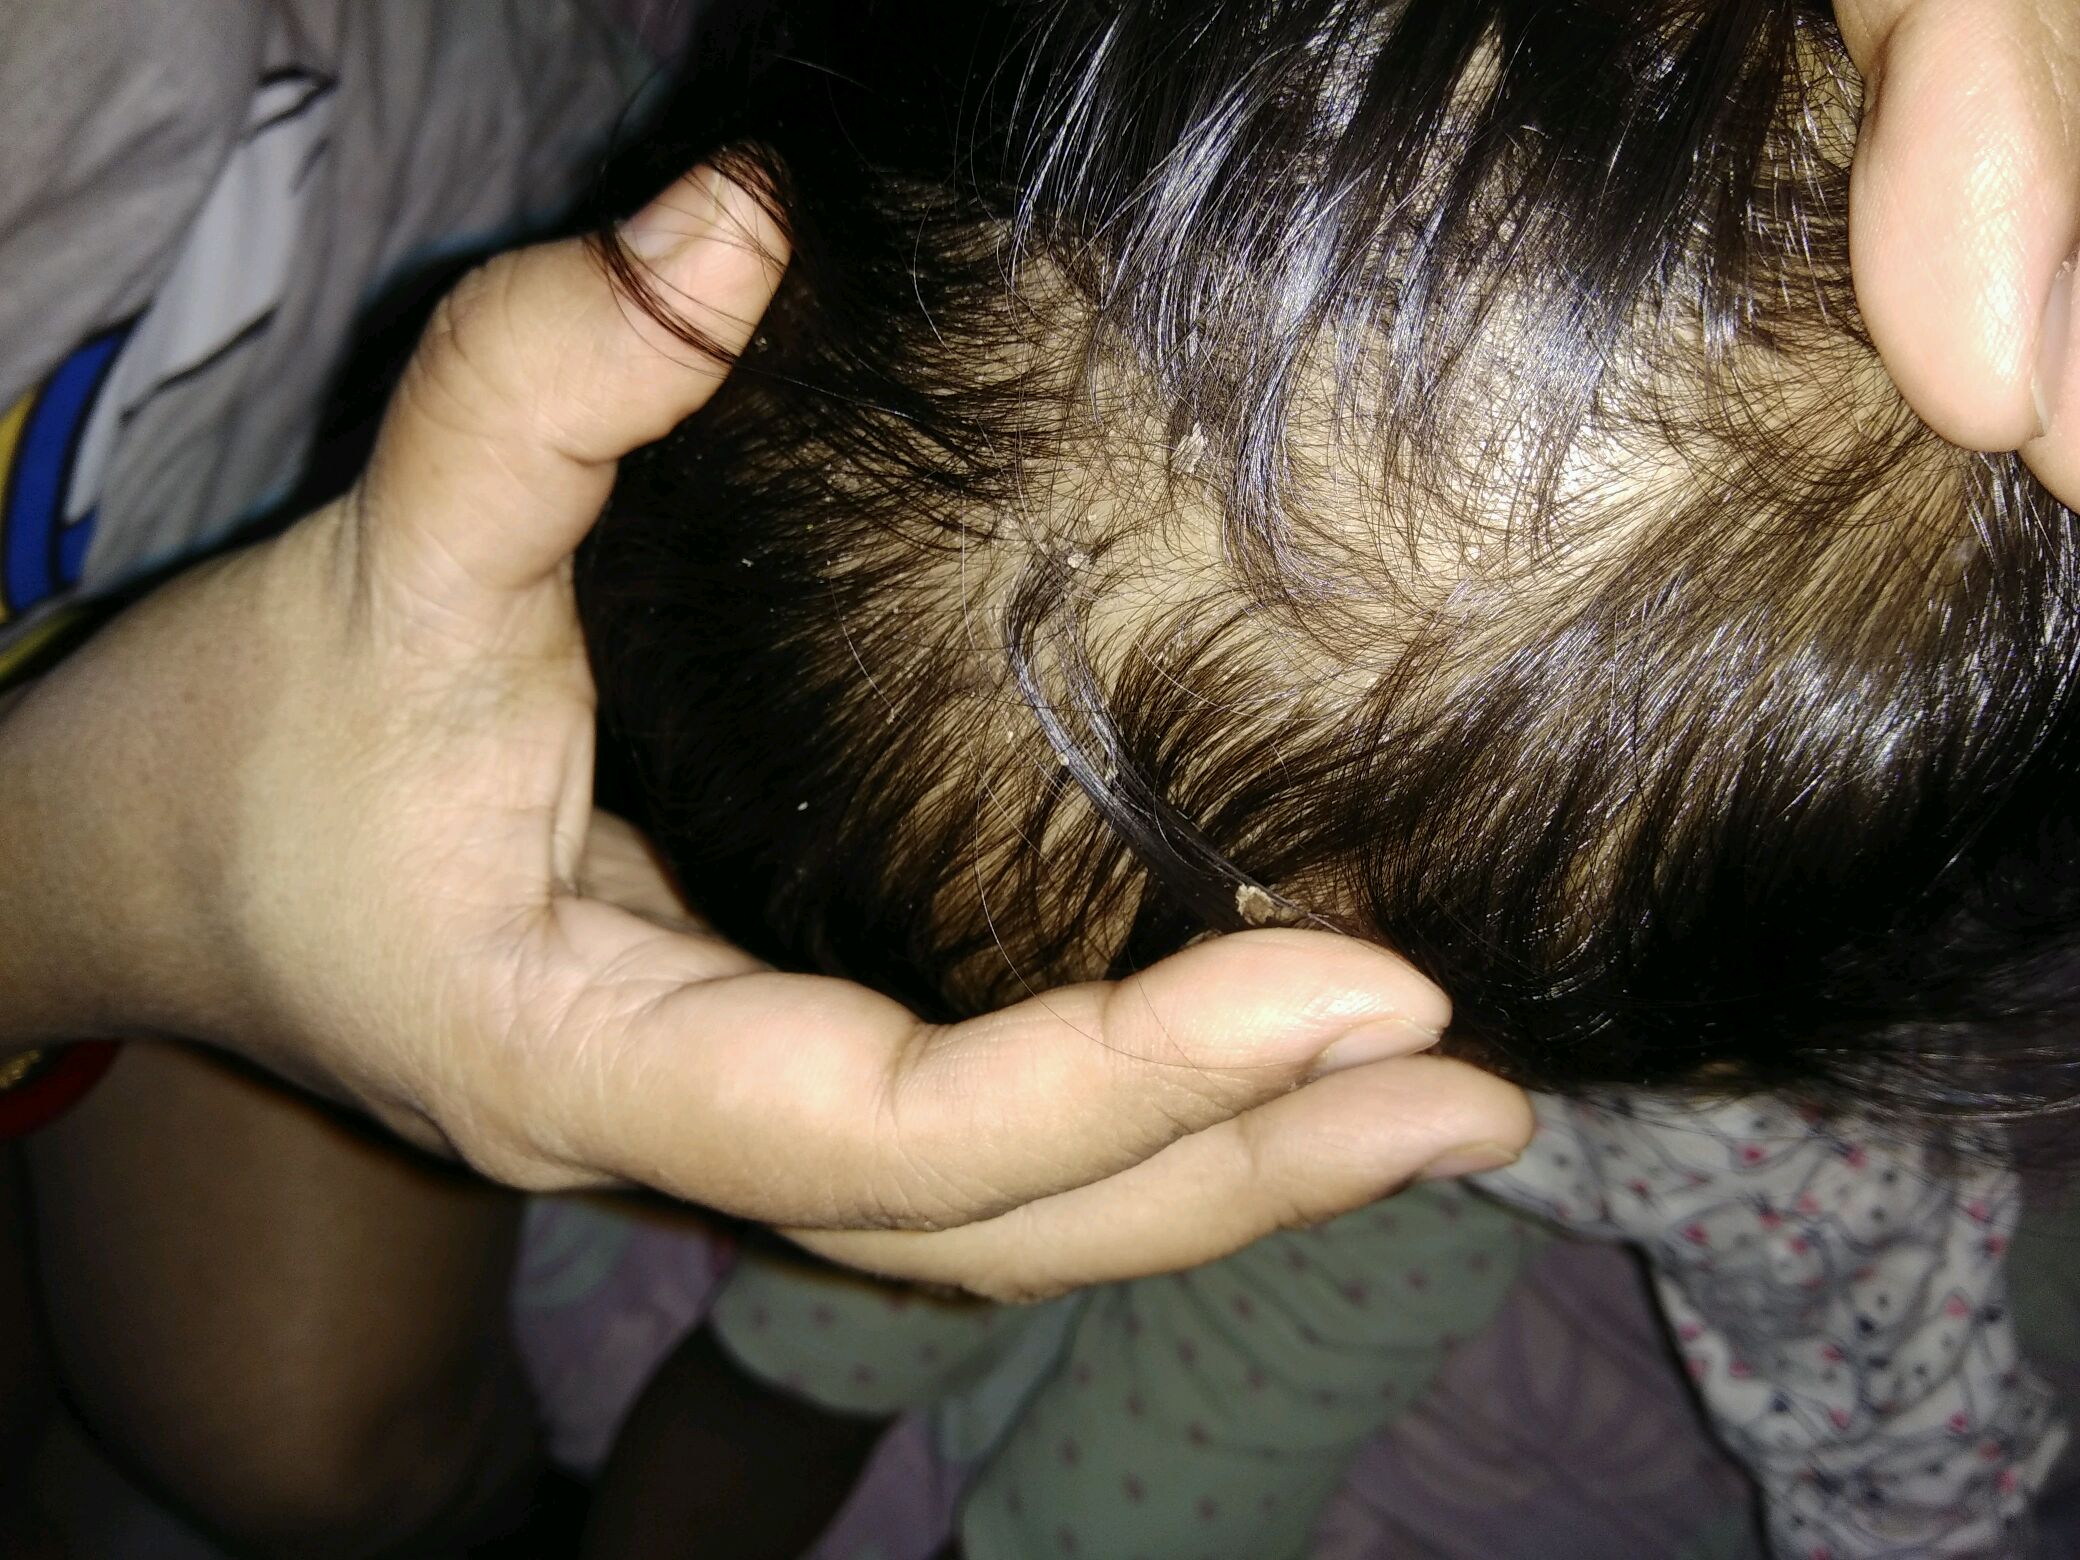 My baby is feeling itchy scalp and layer of skin scales oozes out.